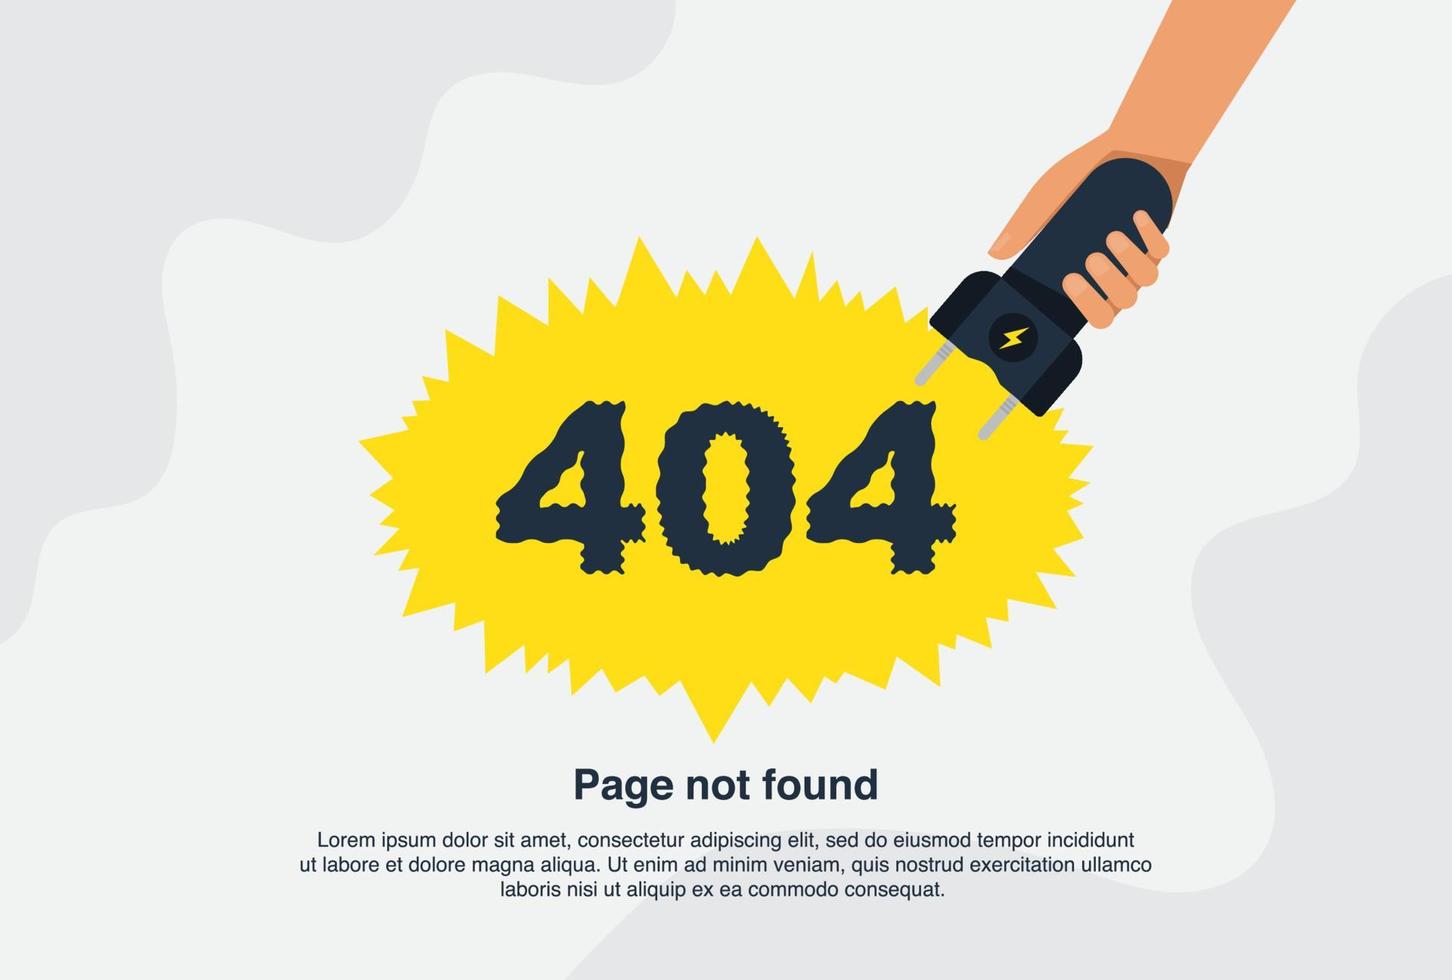 Internet network warning 404 Error Page or File not found for web page. vector